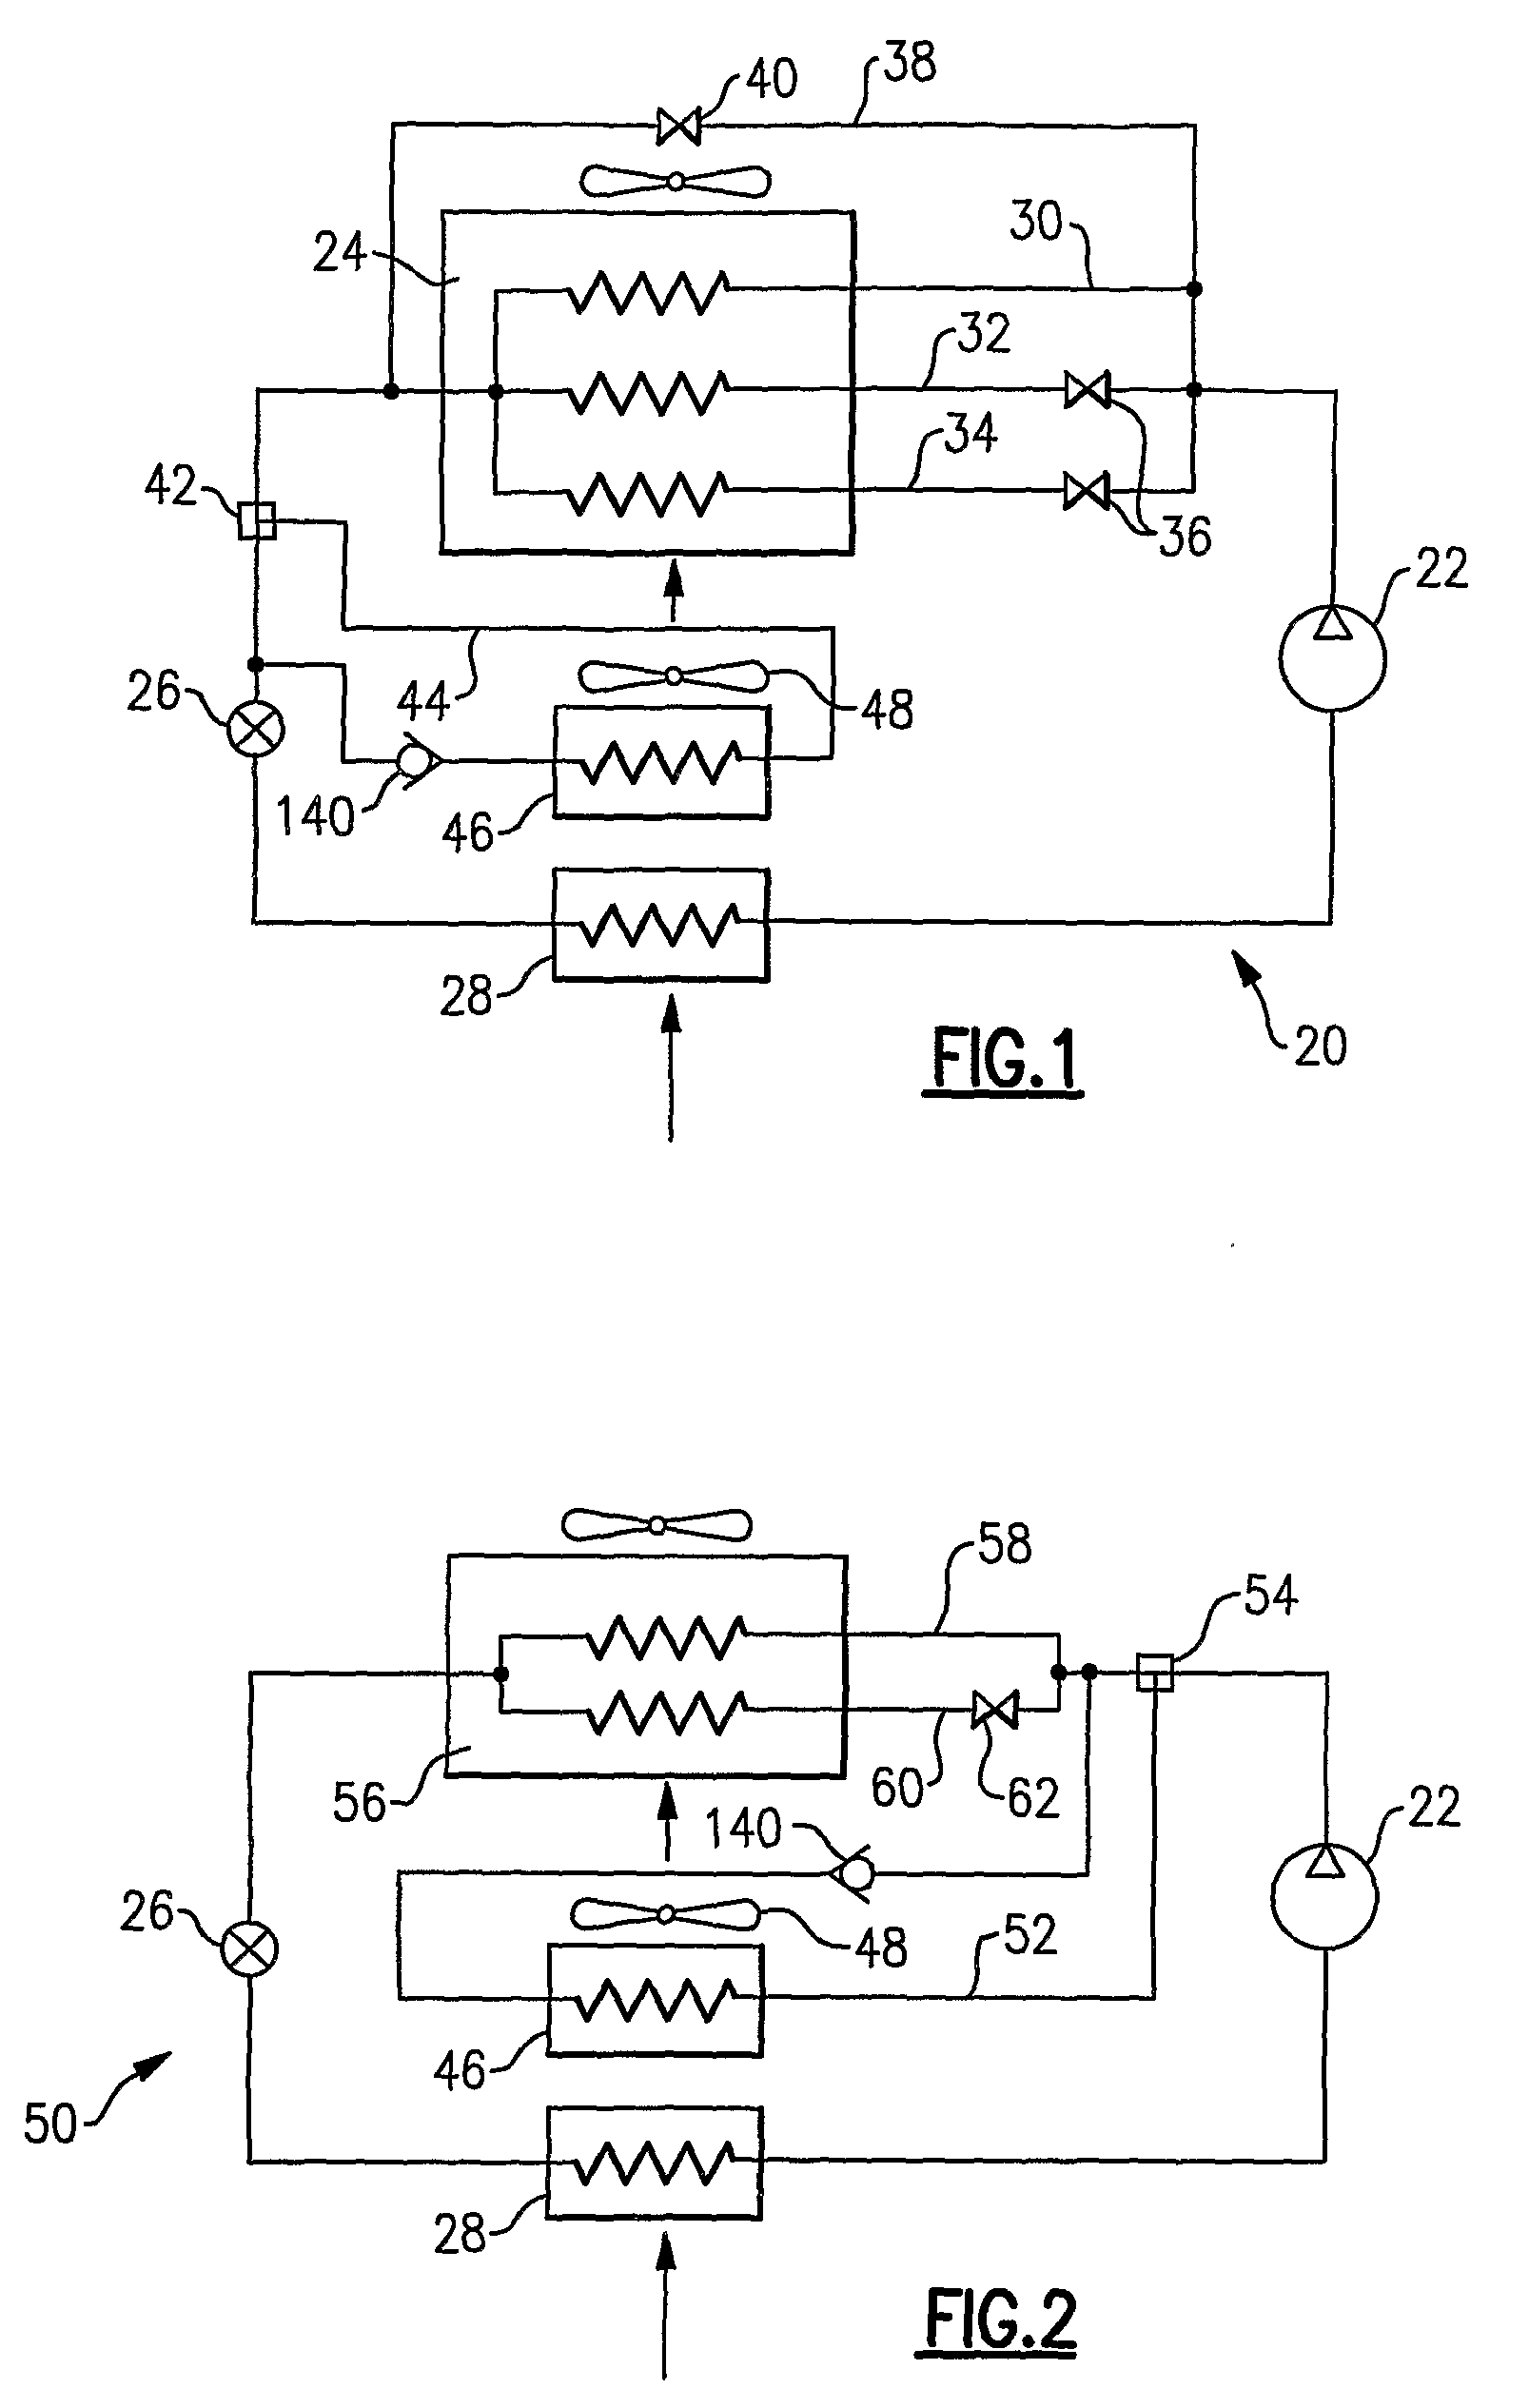 Refrigerant Dehumidification System with Variable Condenser Unloading